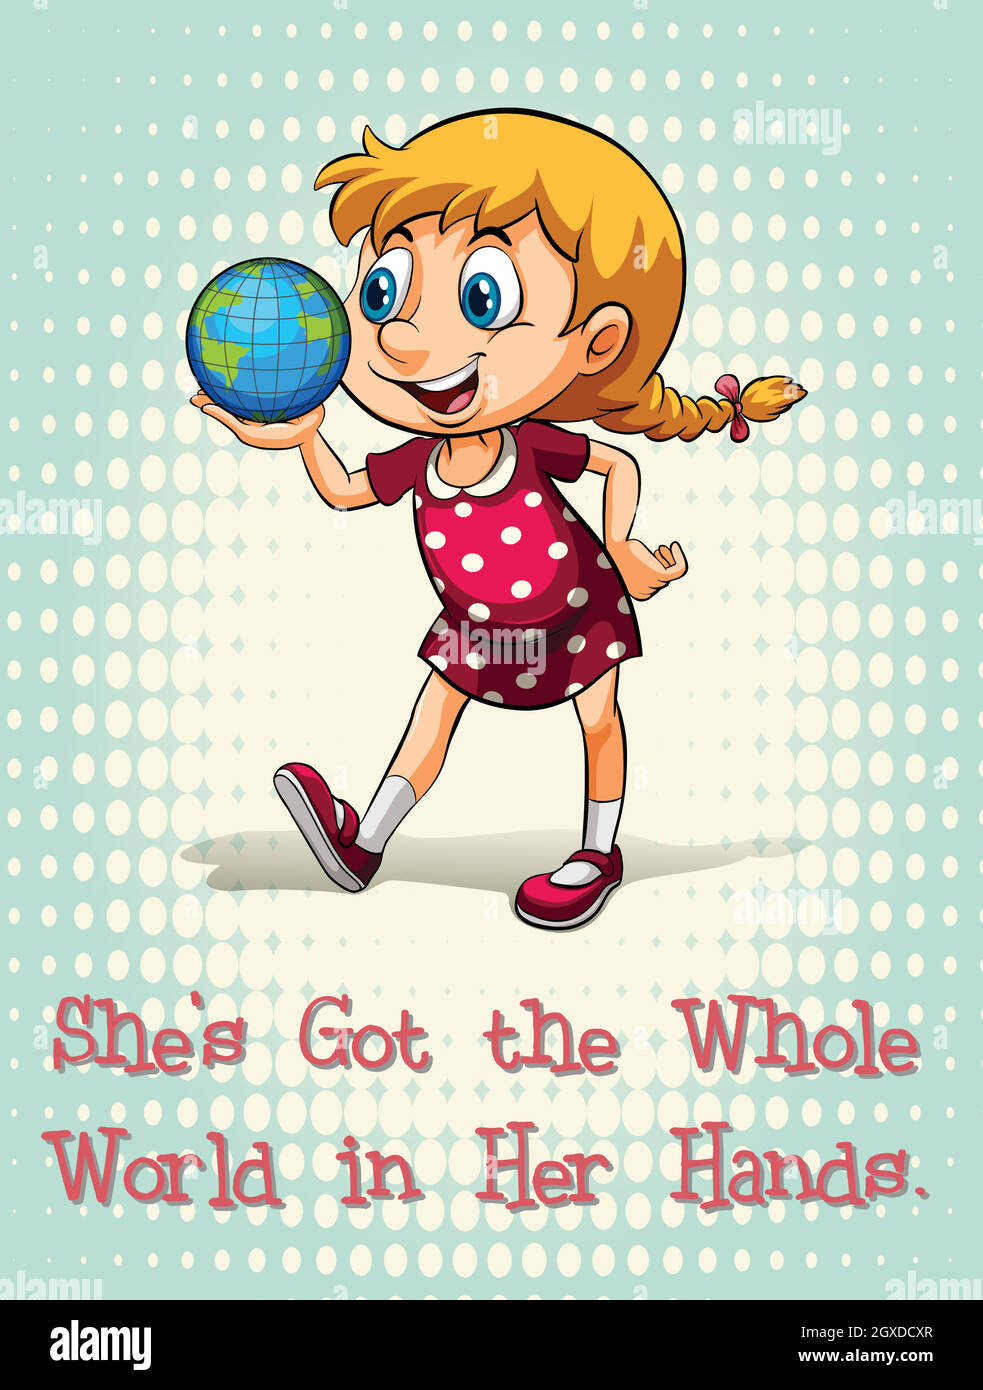 Got the whole world in her hands Stock Vector